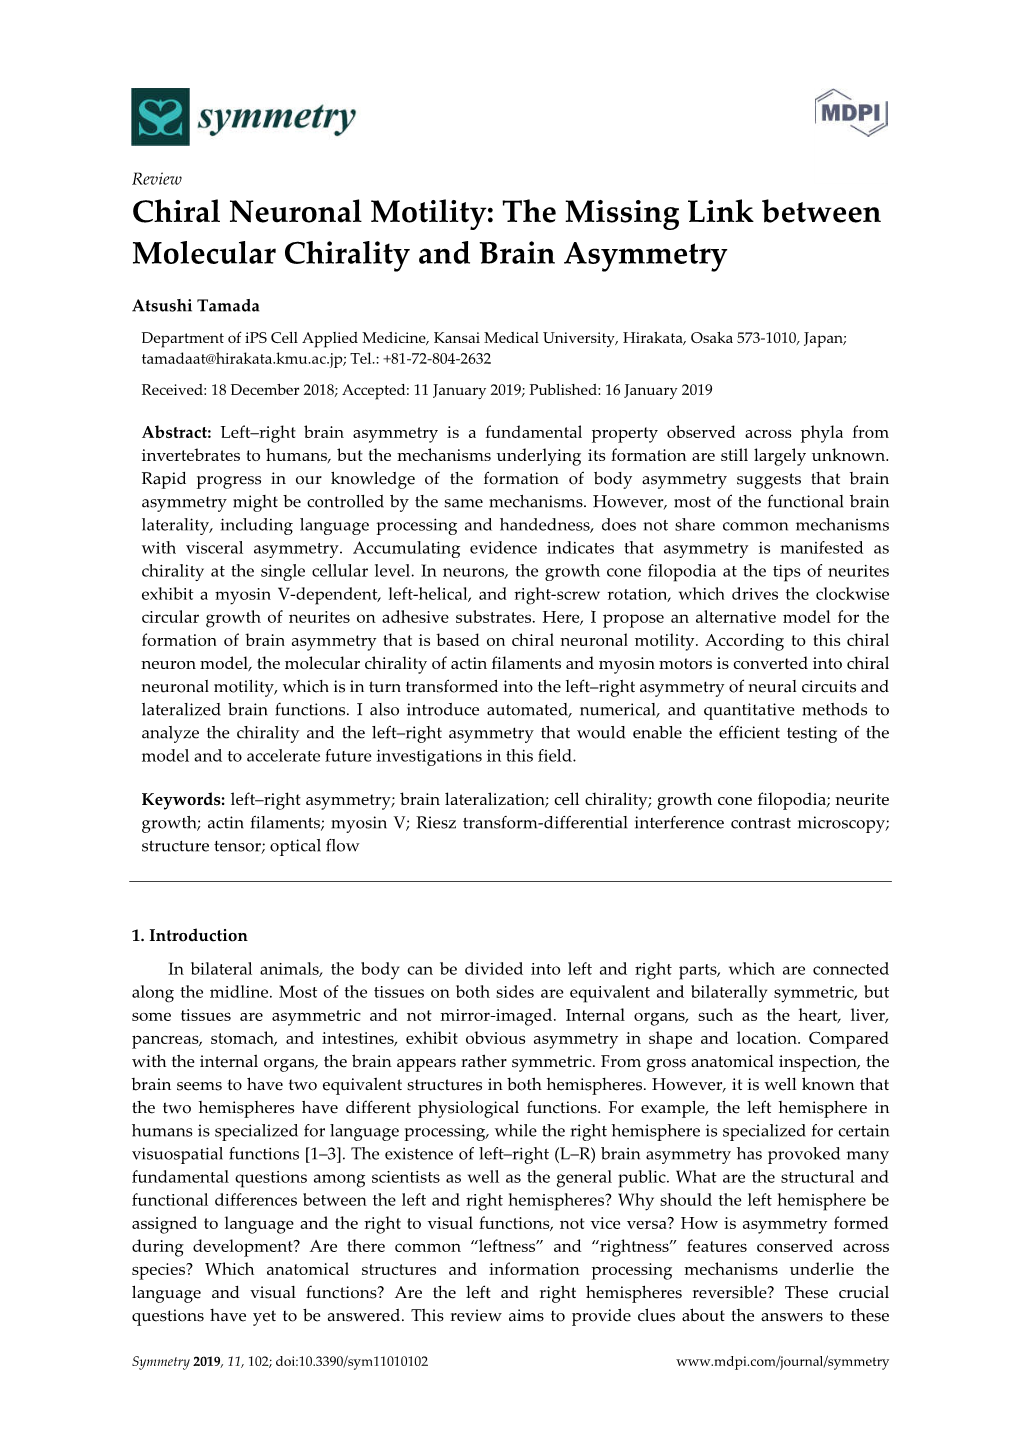 The Missing Link Between Molecular Chirality and Brain Asymmetry